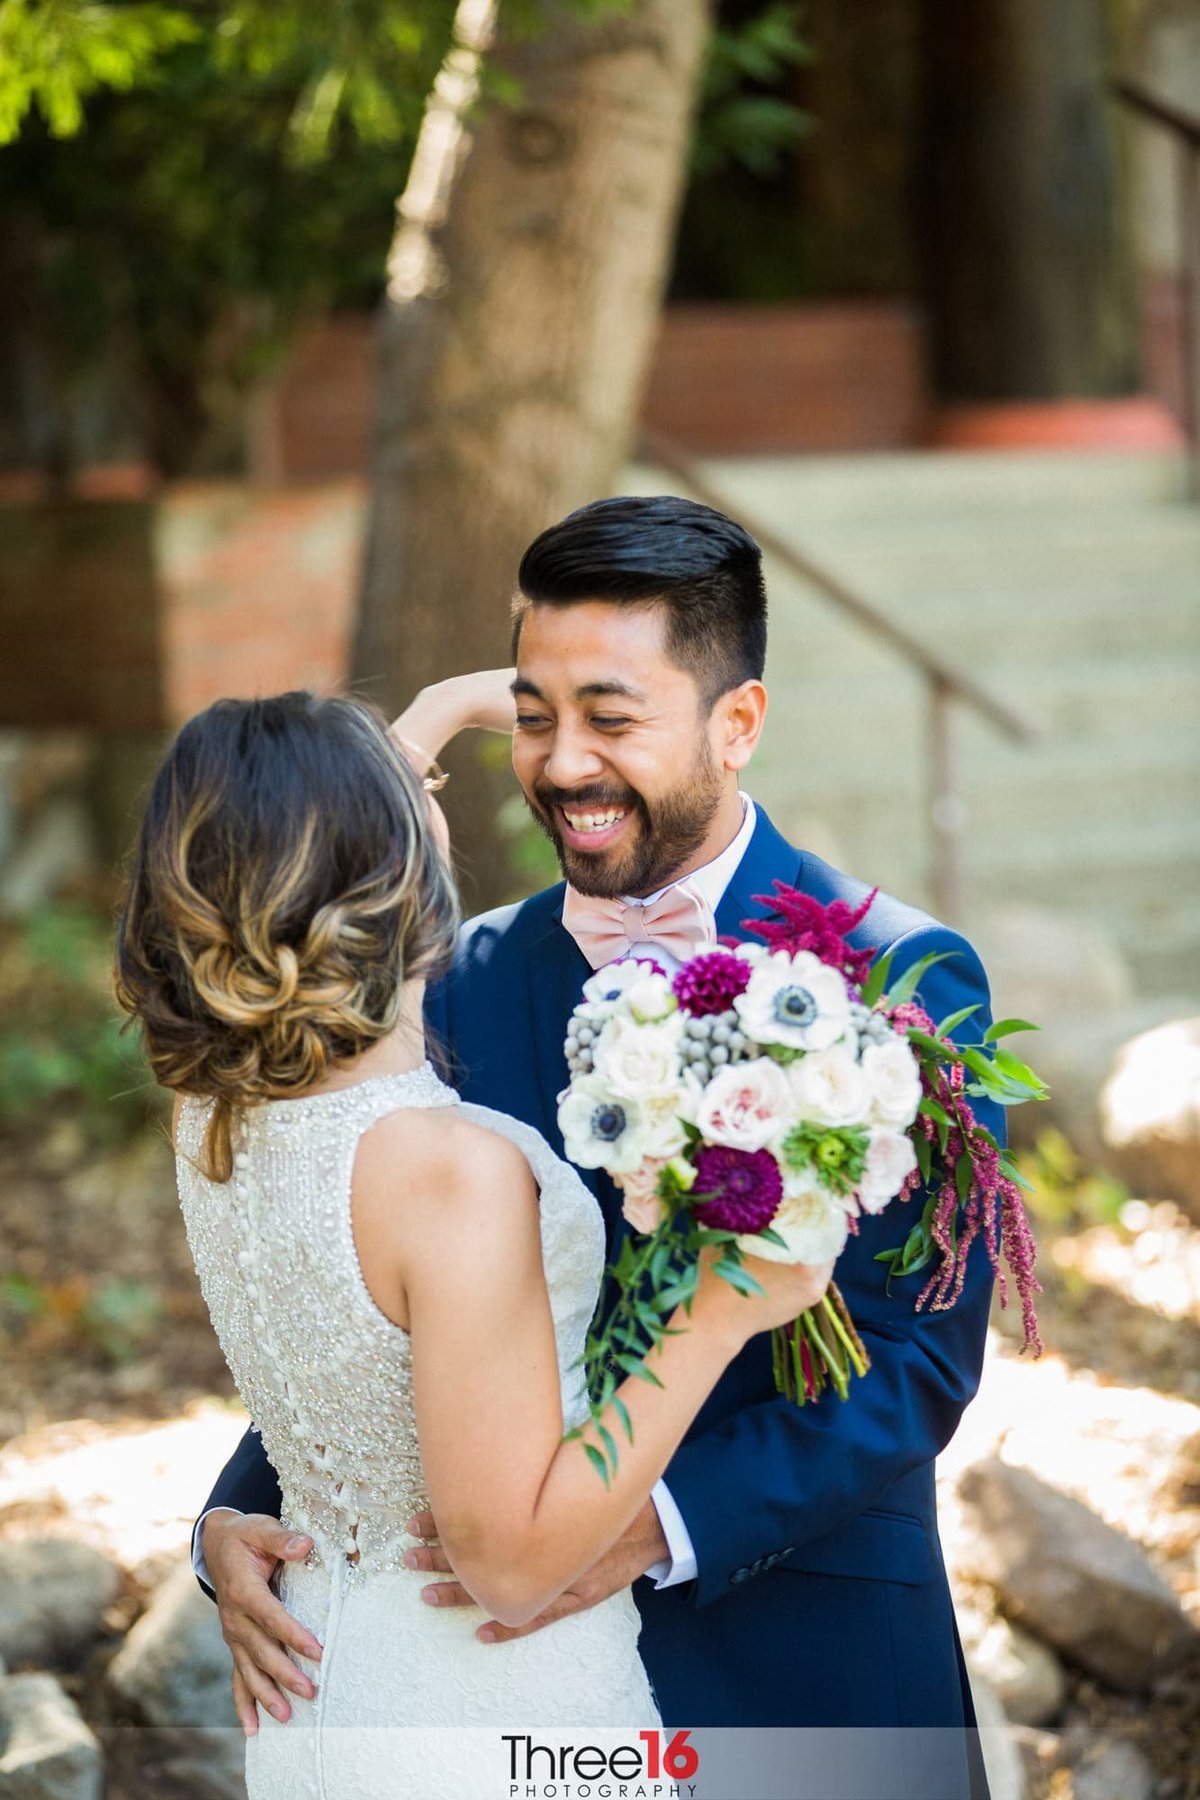 It's all smiles between this Bride and her Groom